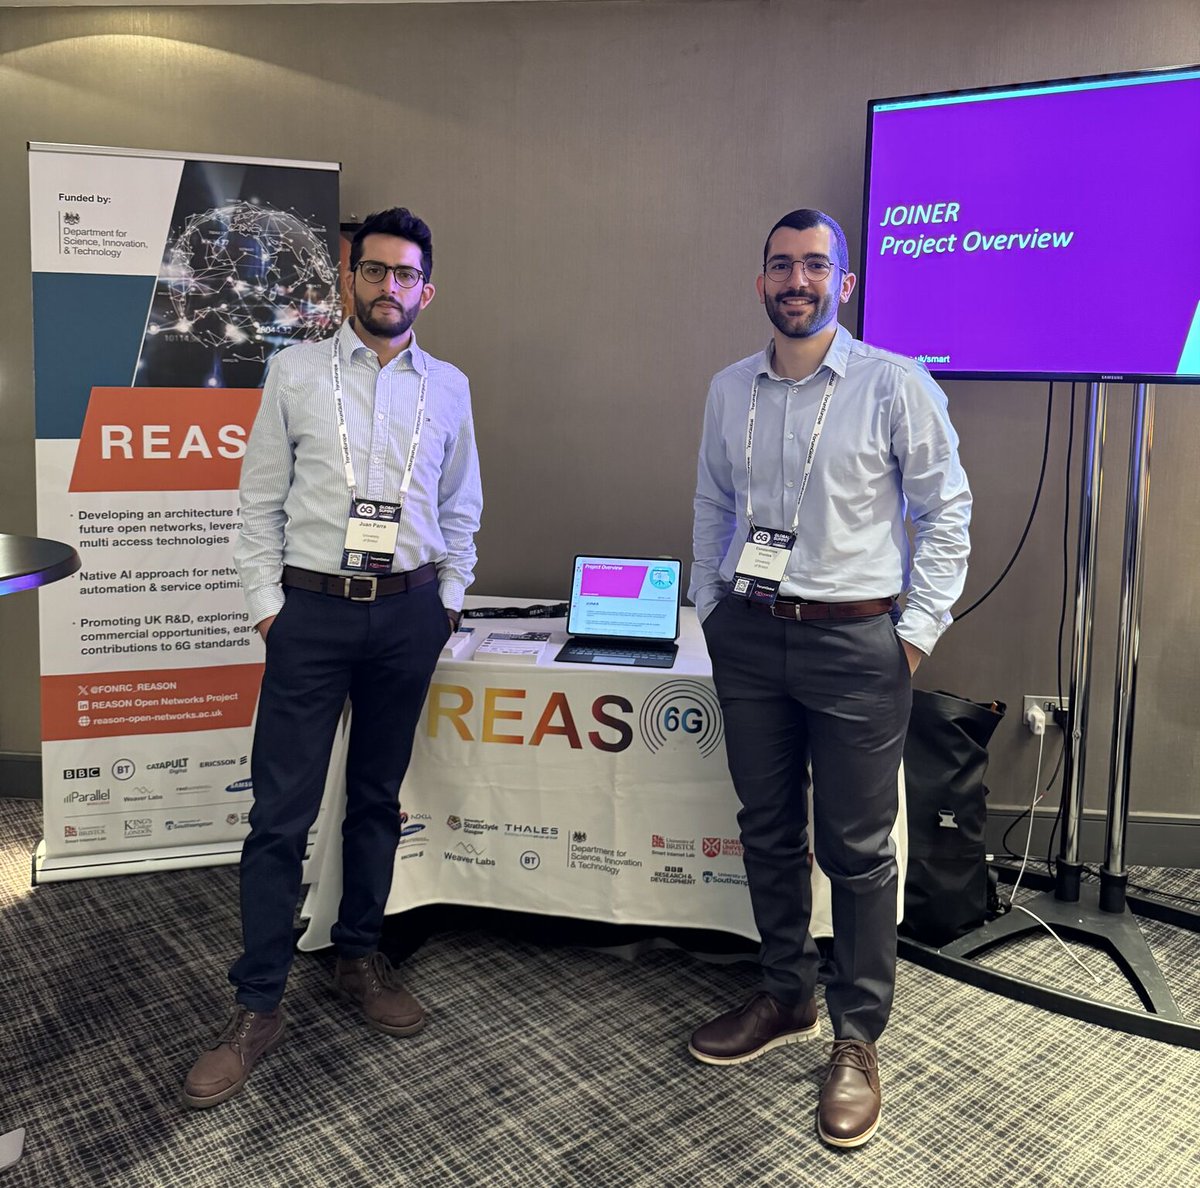 Two of our flaghip projects, @FONRC_REASON and JOINER are exhibiting at the #6G Global Summit today!  Come and say hello!

Our Director, @Dsimeo will also be on the panel at 11:25 for 'Shaping the 6G reality - what are we trying to achieve?' - you don't want to miss it!